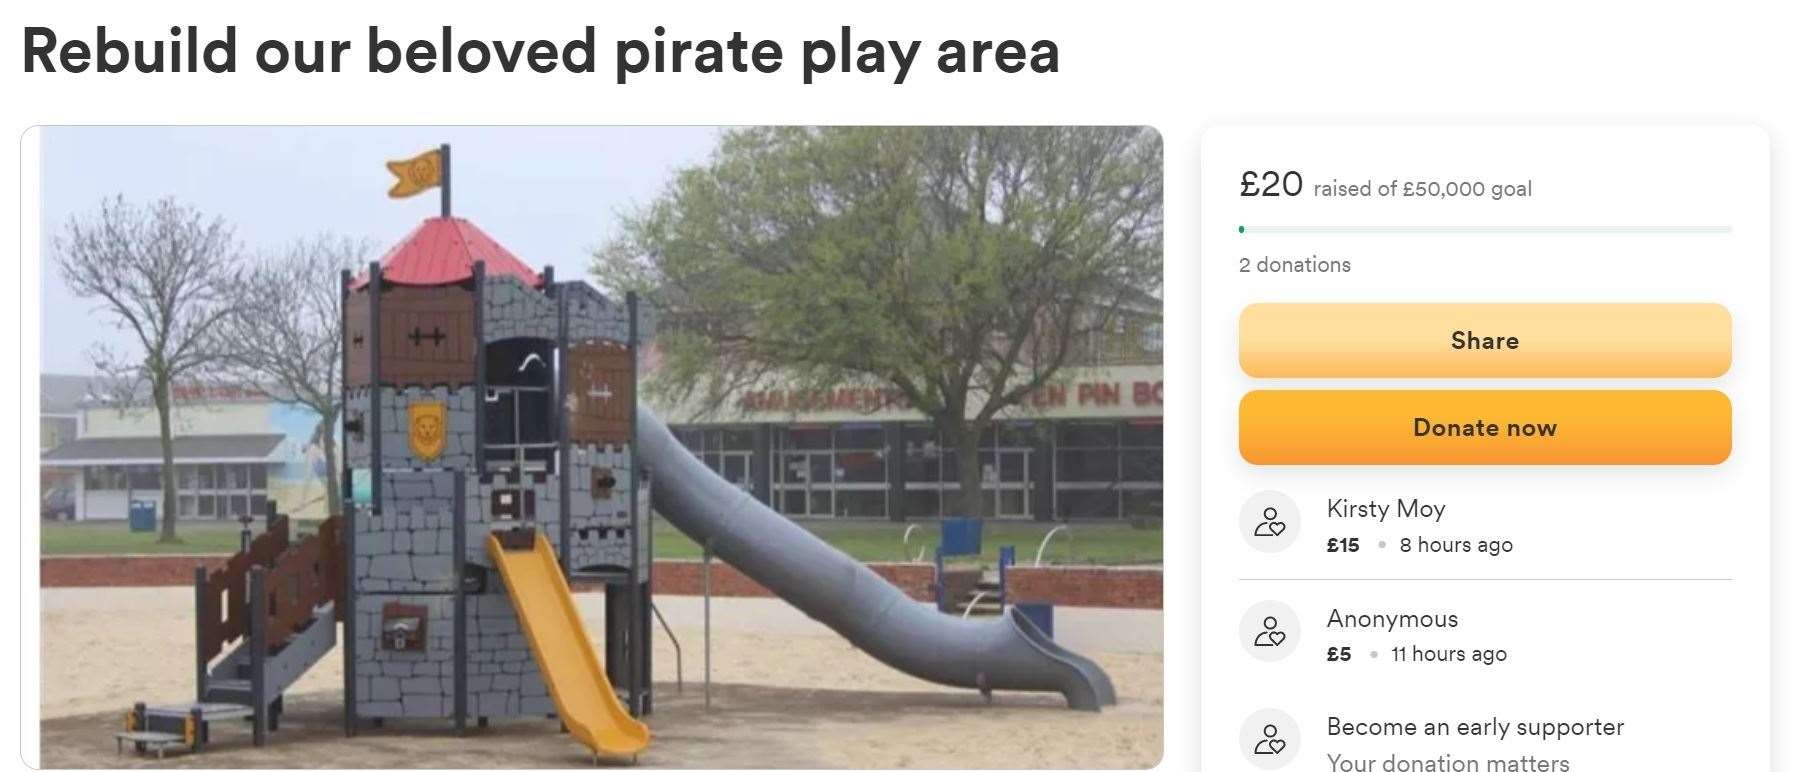 Gofundme page launched by Dawn Turnbull to raise funds to rebuild the blitzed play area in Beachfields, Sheerness